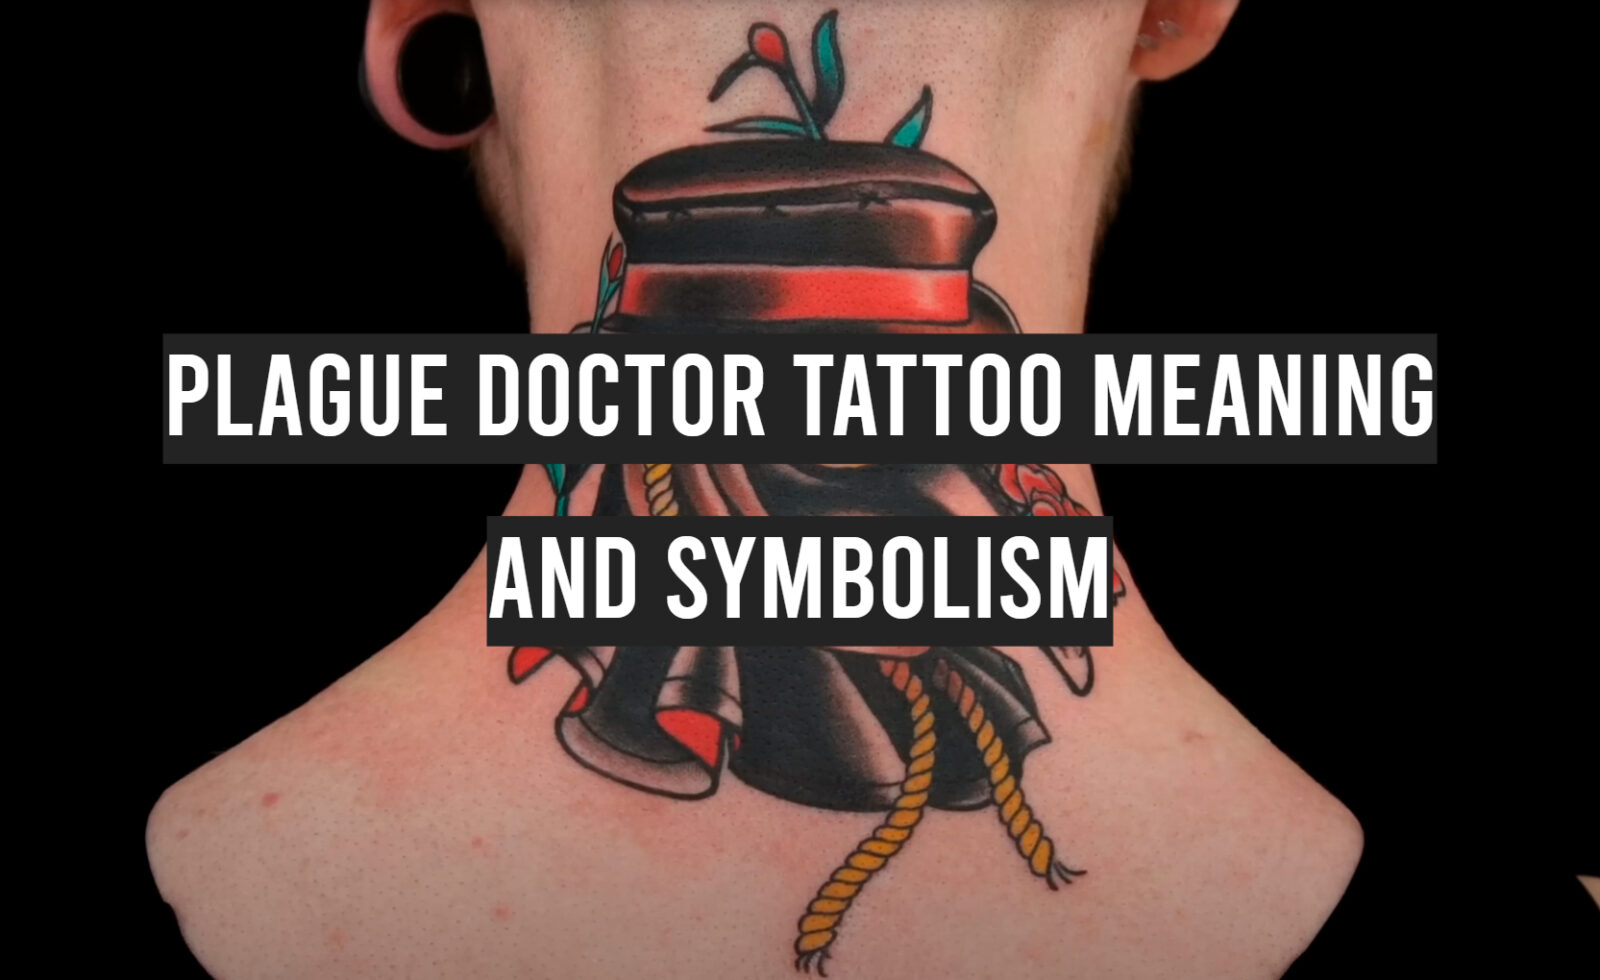 Plague Doctor Tattoo Meaning and Symbolism